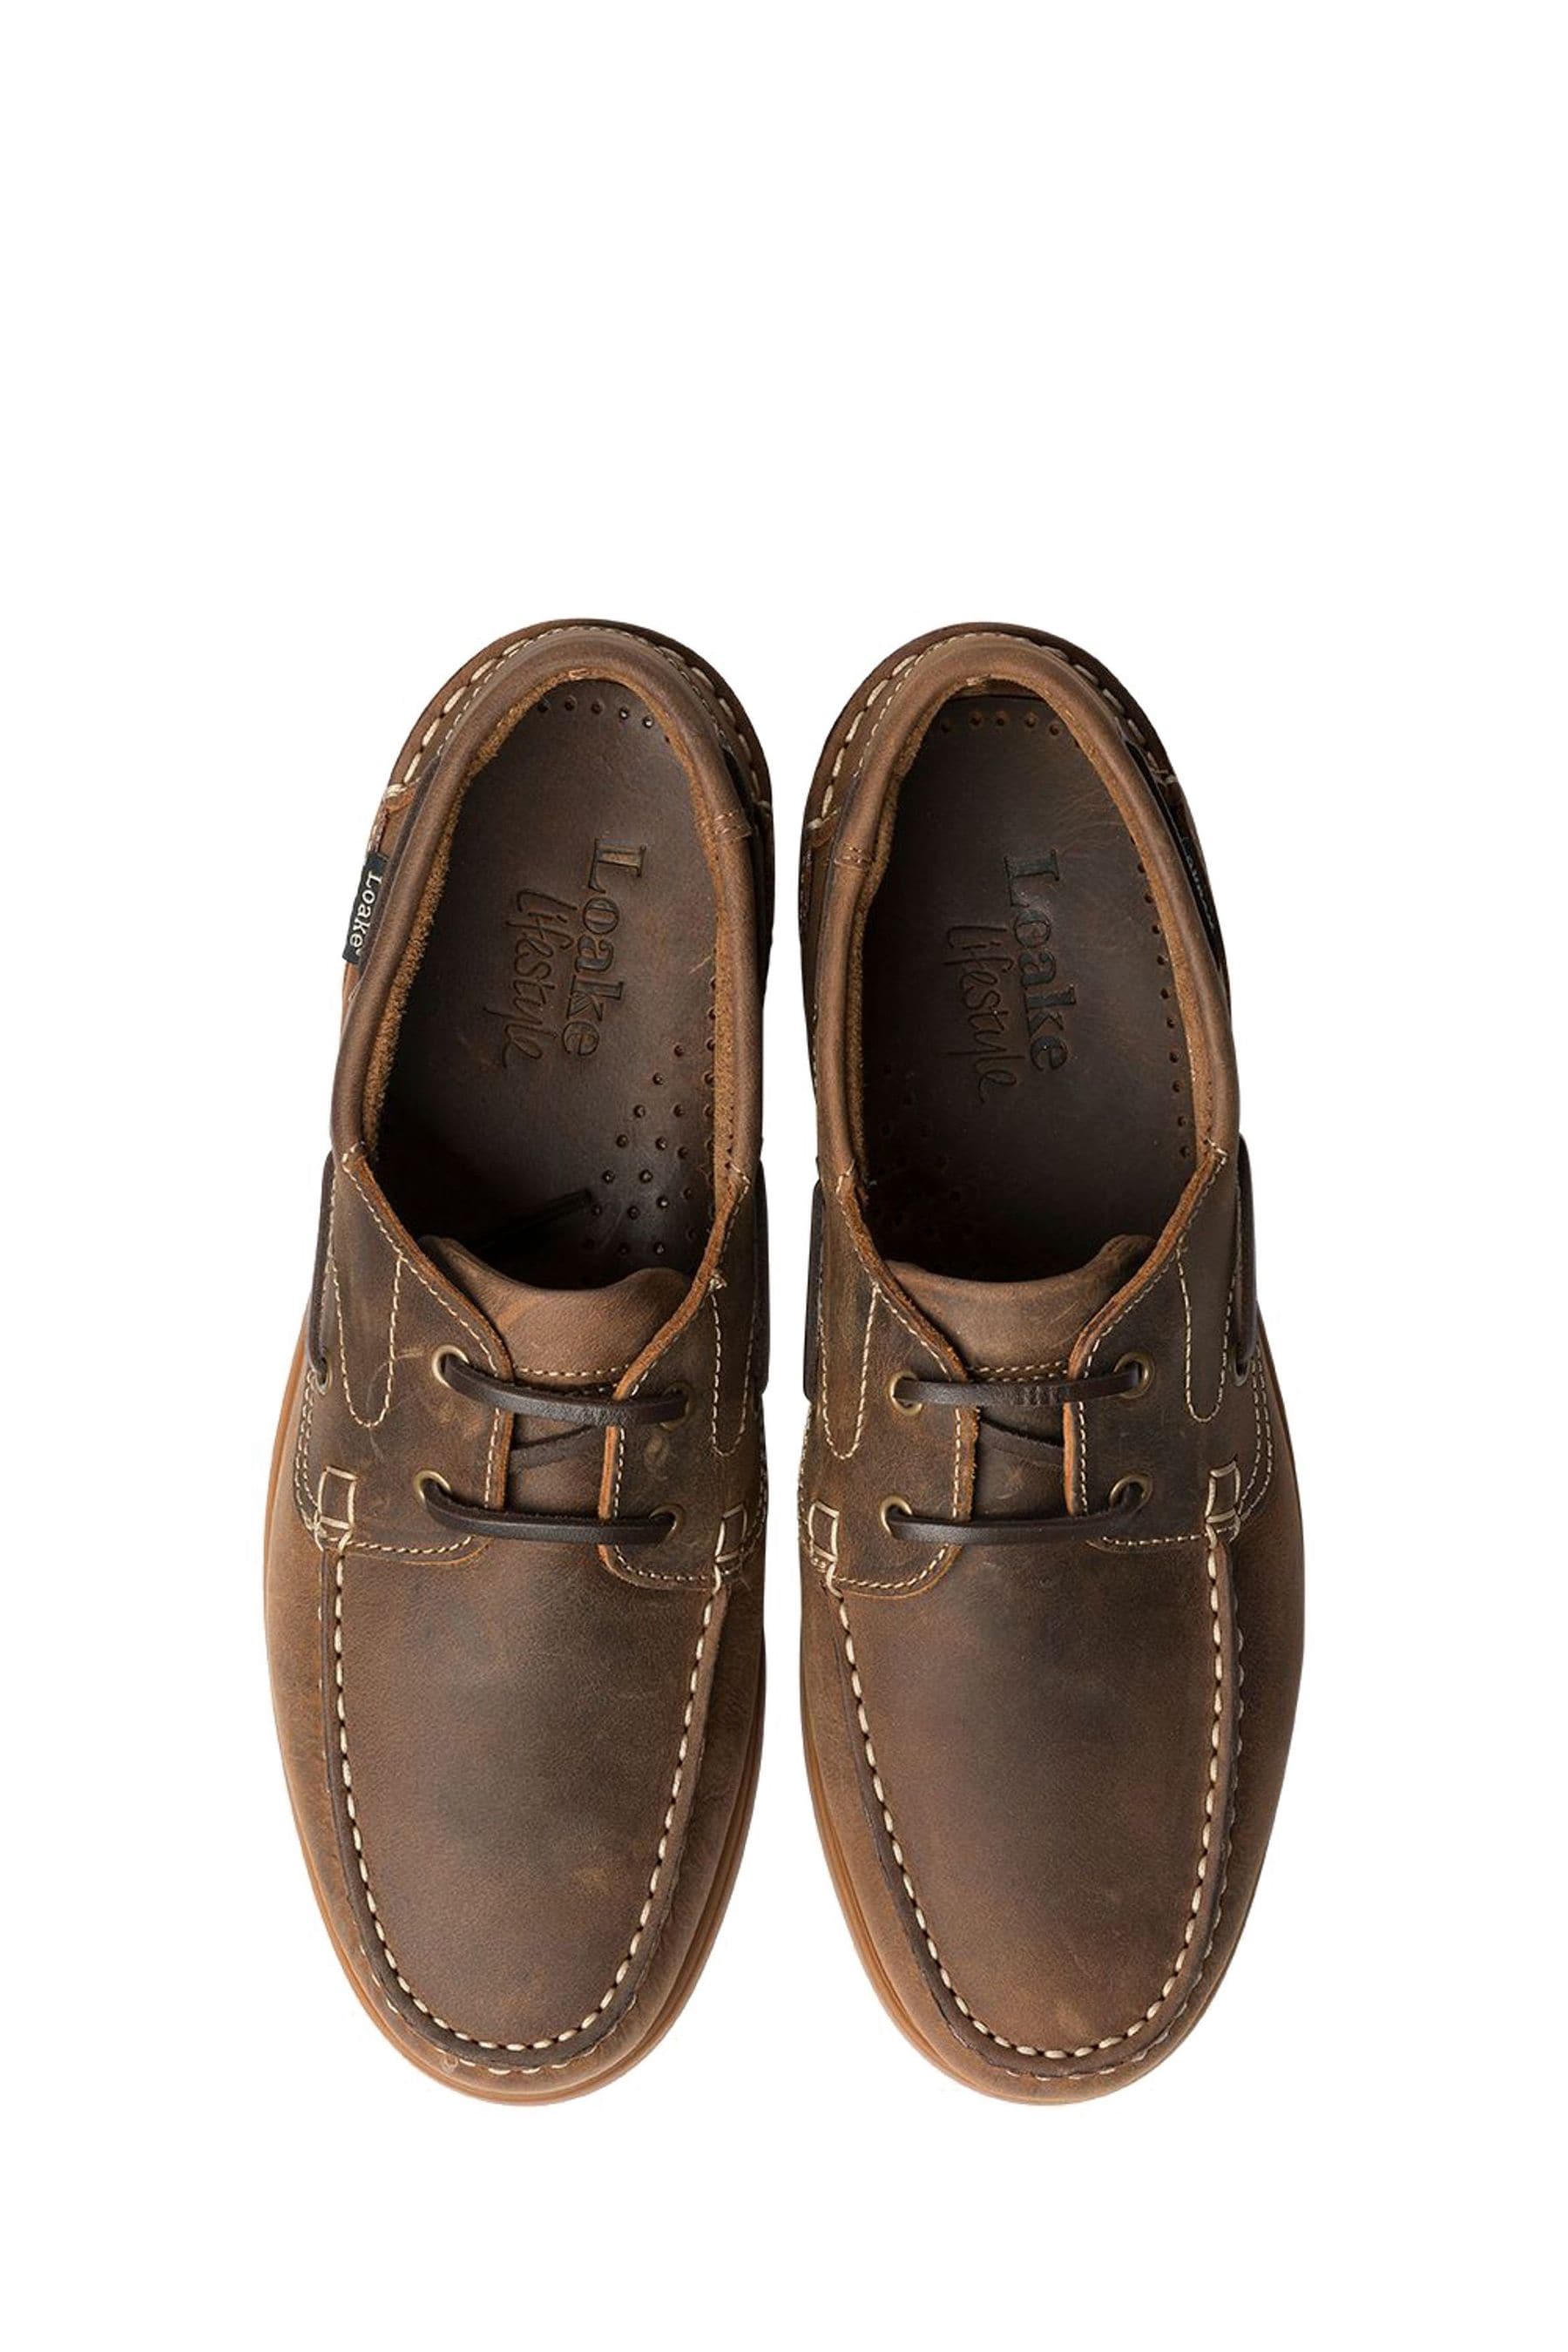 Buy Loake Crazy Leather Lymington Boat Shoes from the Next UK online shop